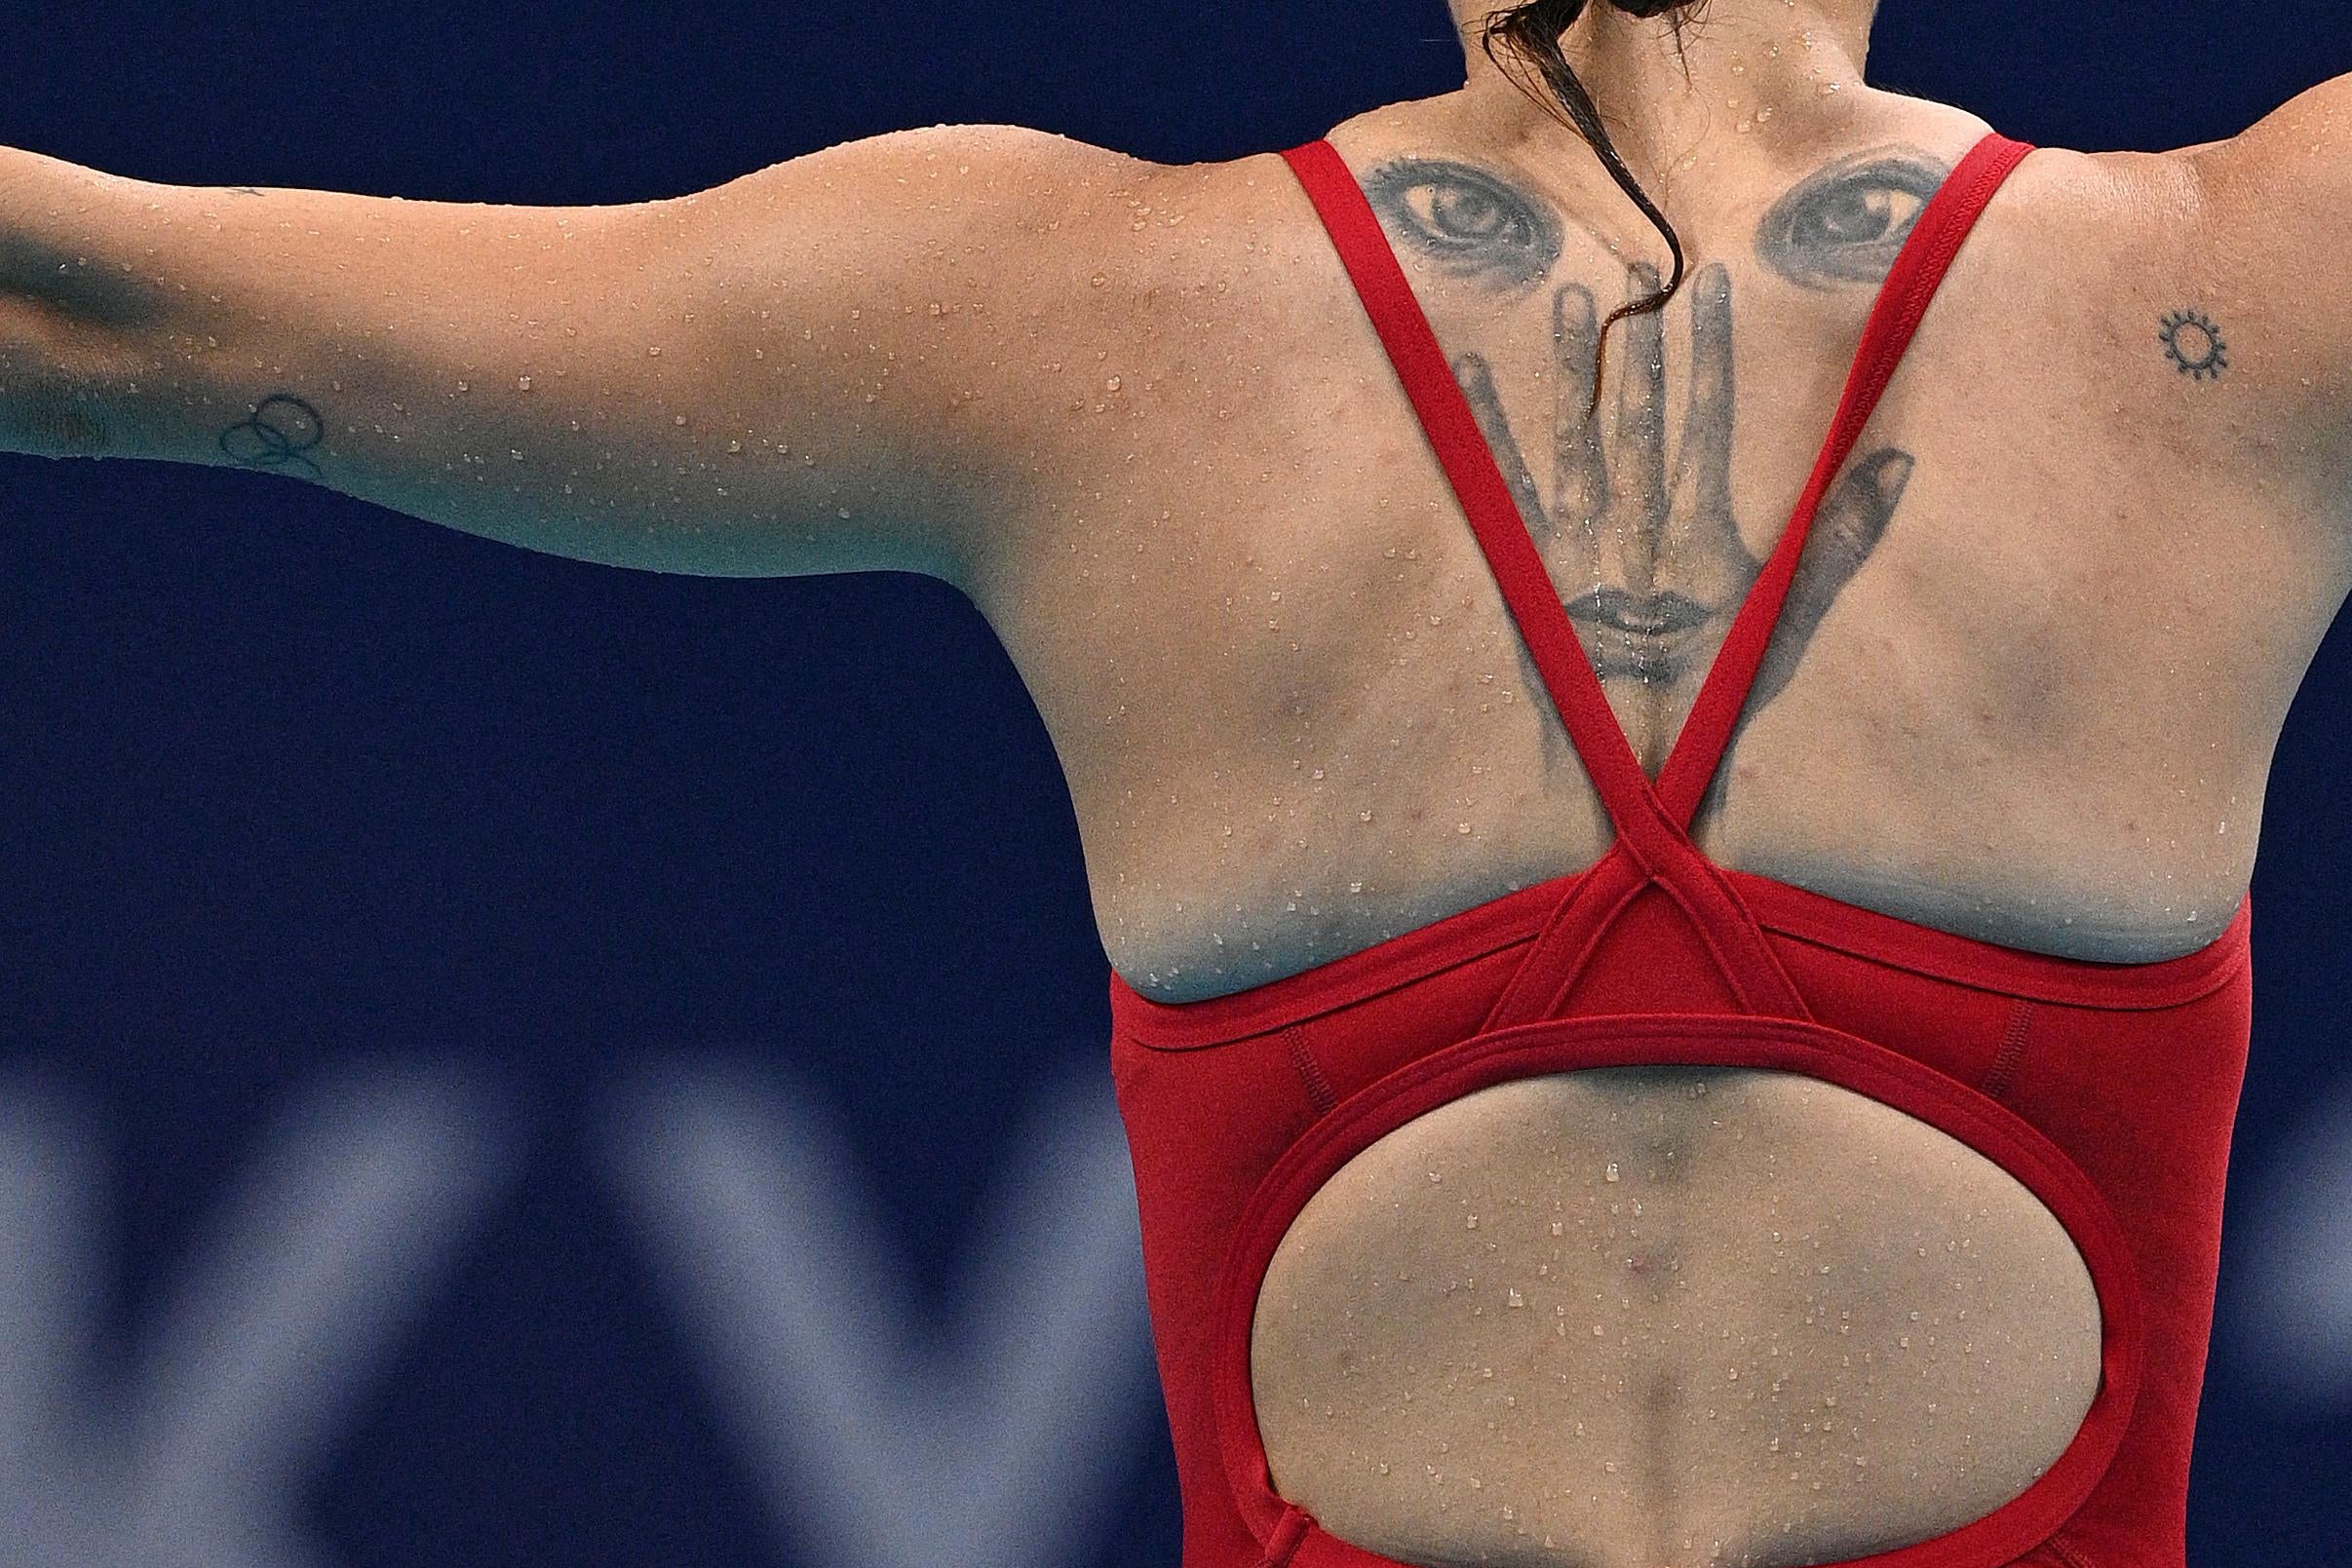 The back of a female diver in her competitive bathing suit, stretching her arms out to the sides, a tattoo visible between her shoulder blades of two eyes, below which are inked the back of a hand and a mouth inside the base of that hand